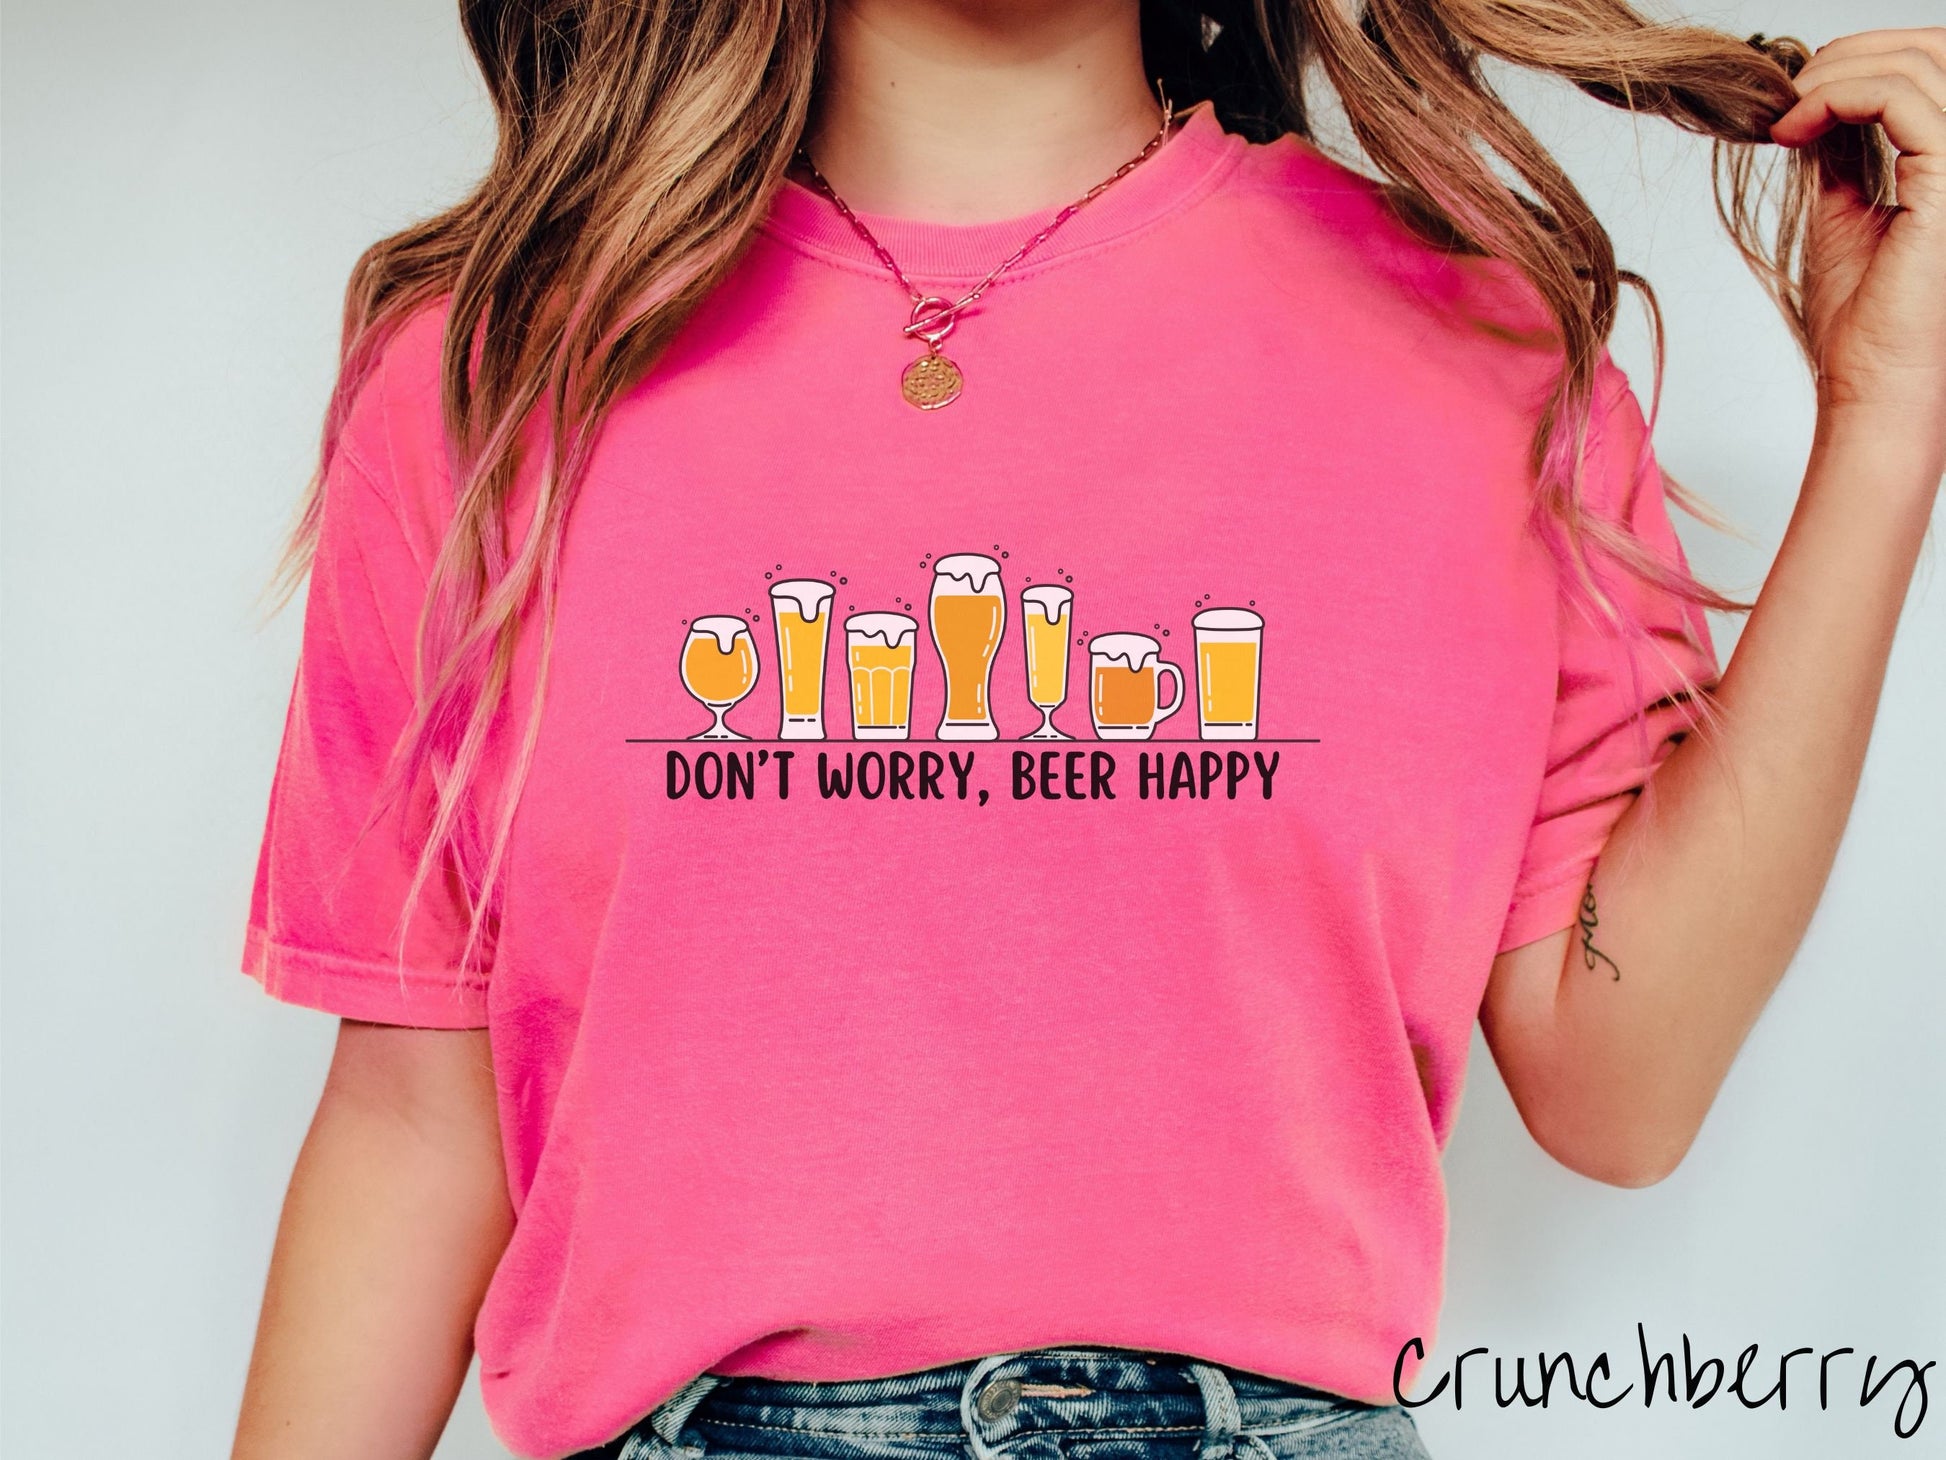 A woman wearing a vintage, crunchberry colored shirt with the text Dont Worry, Beer happy, and above this are varying sizes and shapes of beer glasses with yellow and orange ber all of them have foam coming out the tops.